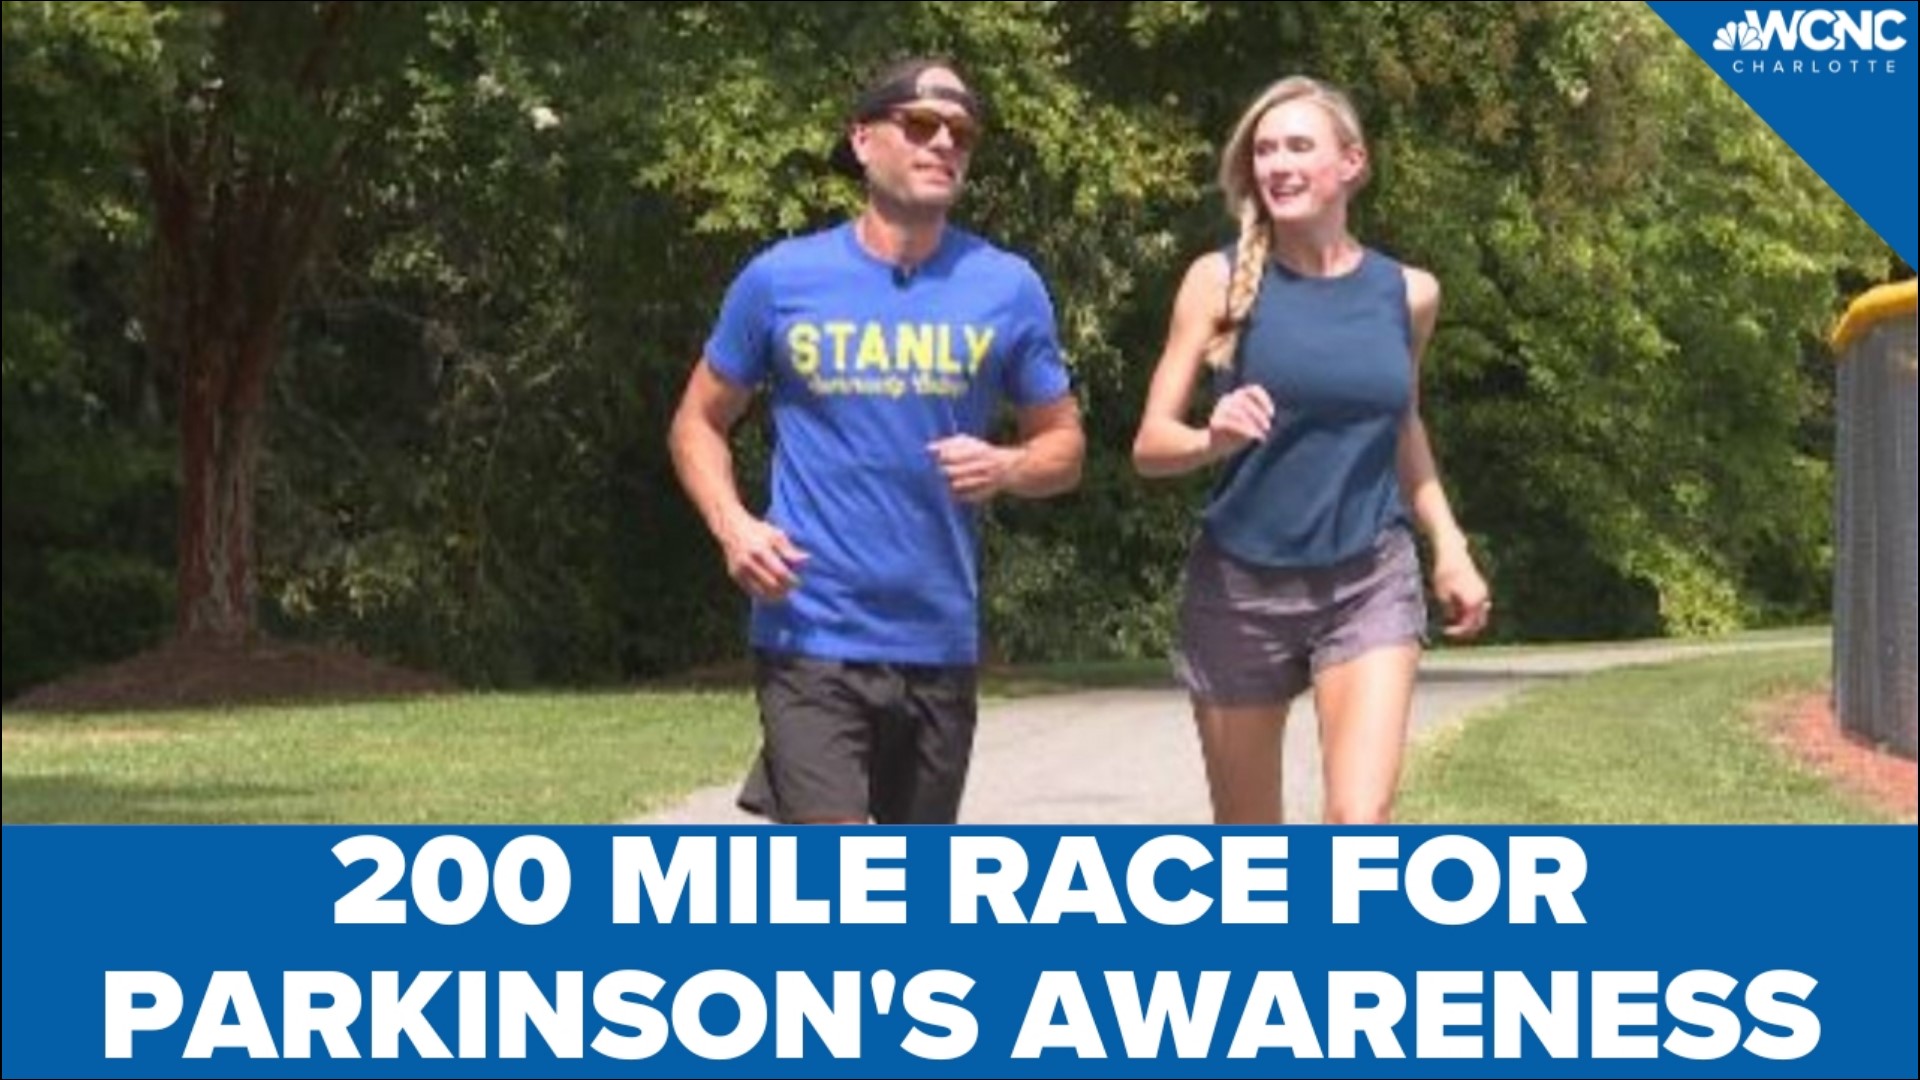 WCNC Charlotte's Briana Harper shares how this extreme effort is helping to spread awareness and slow the progress of the illness.